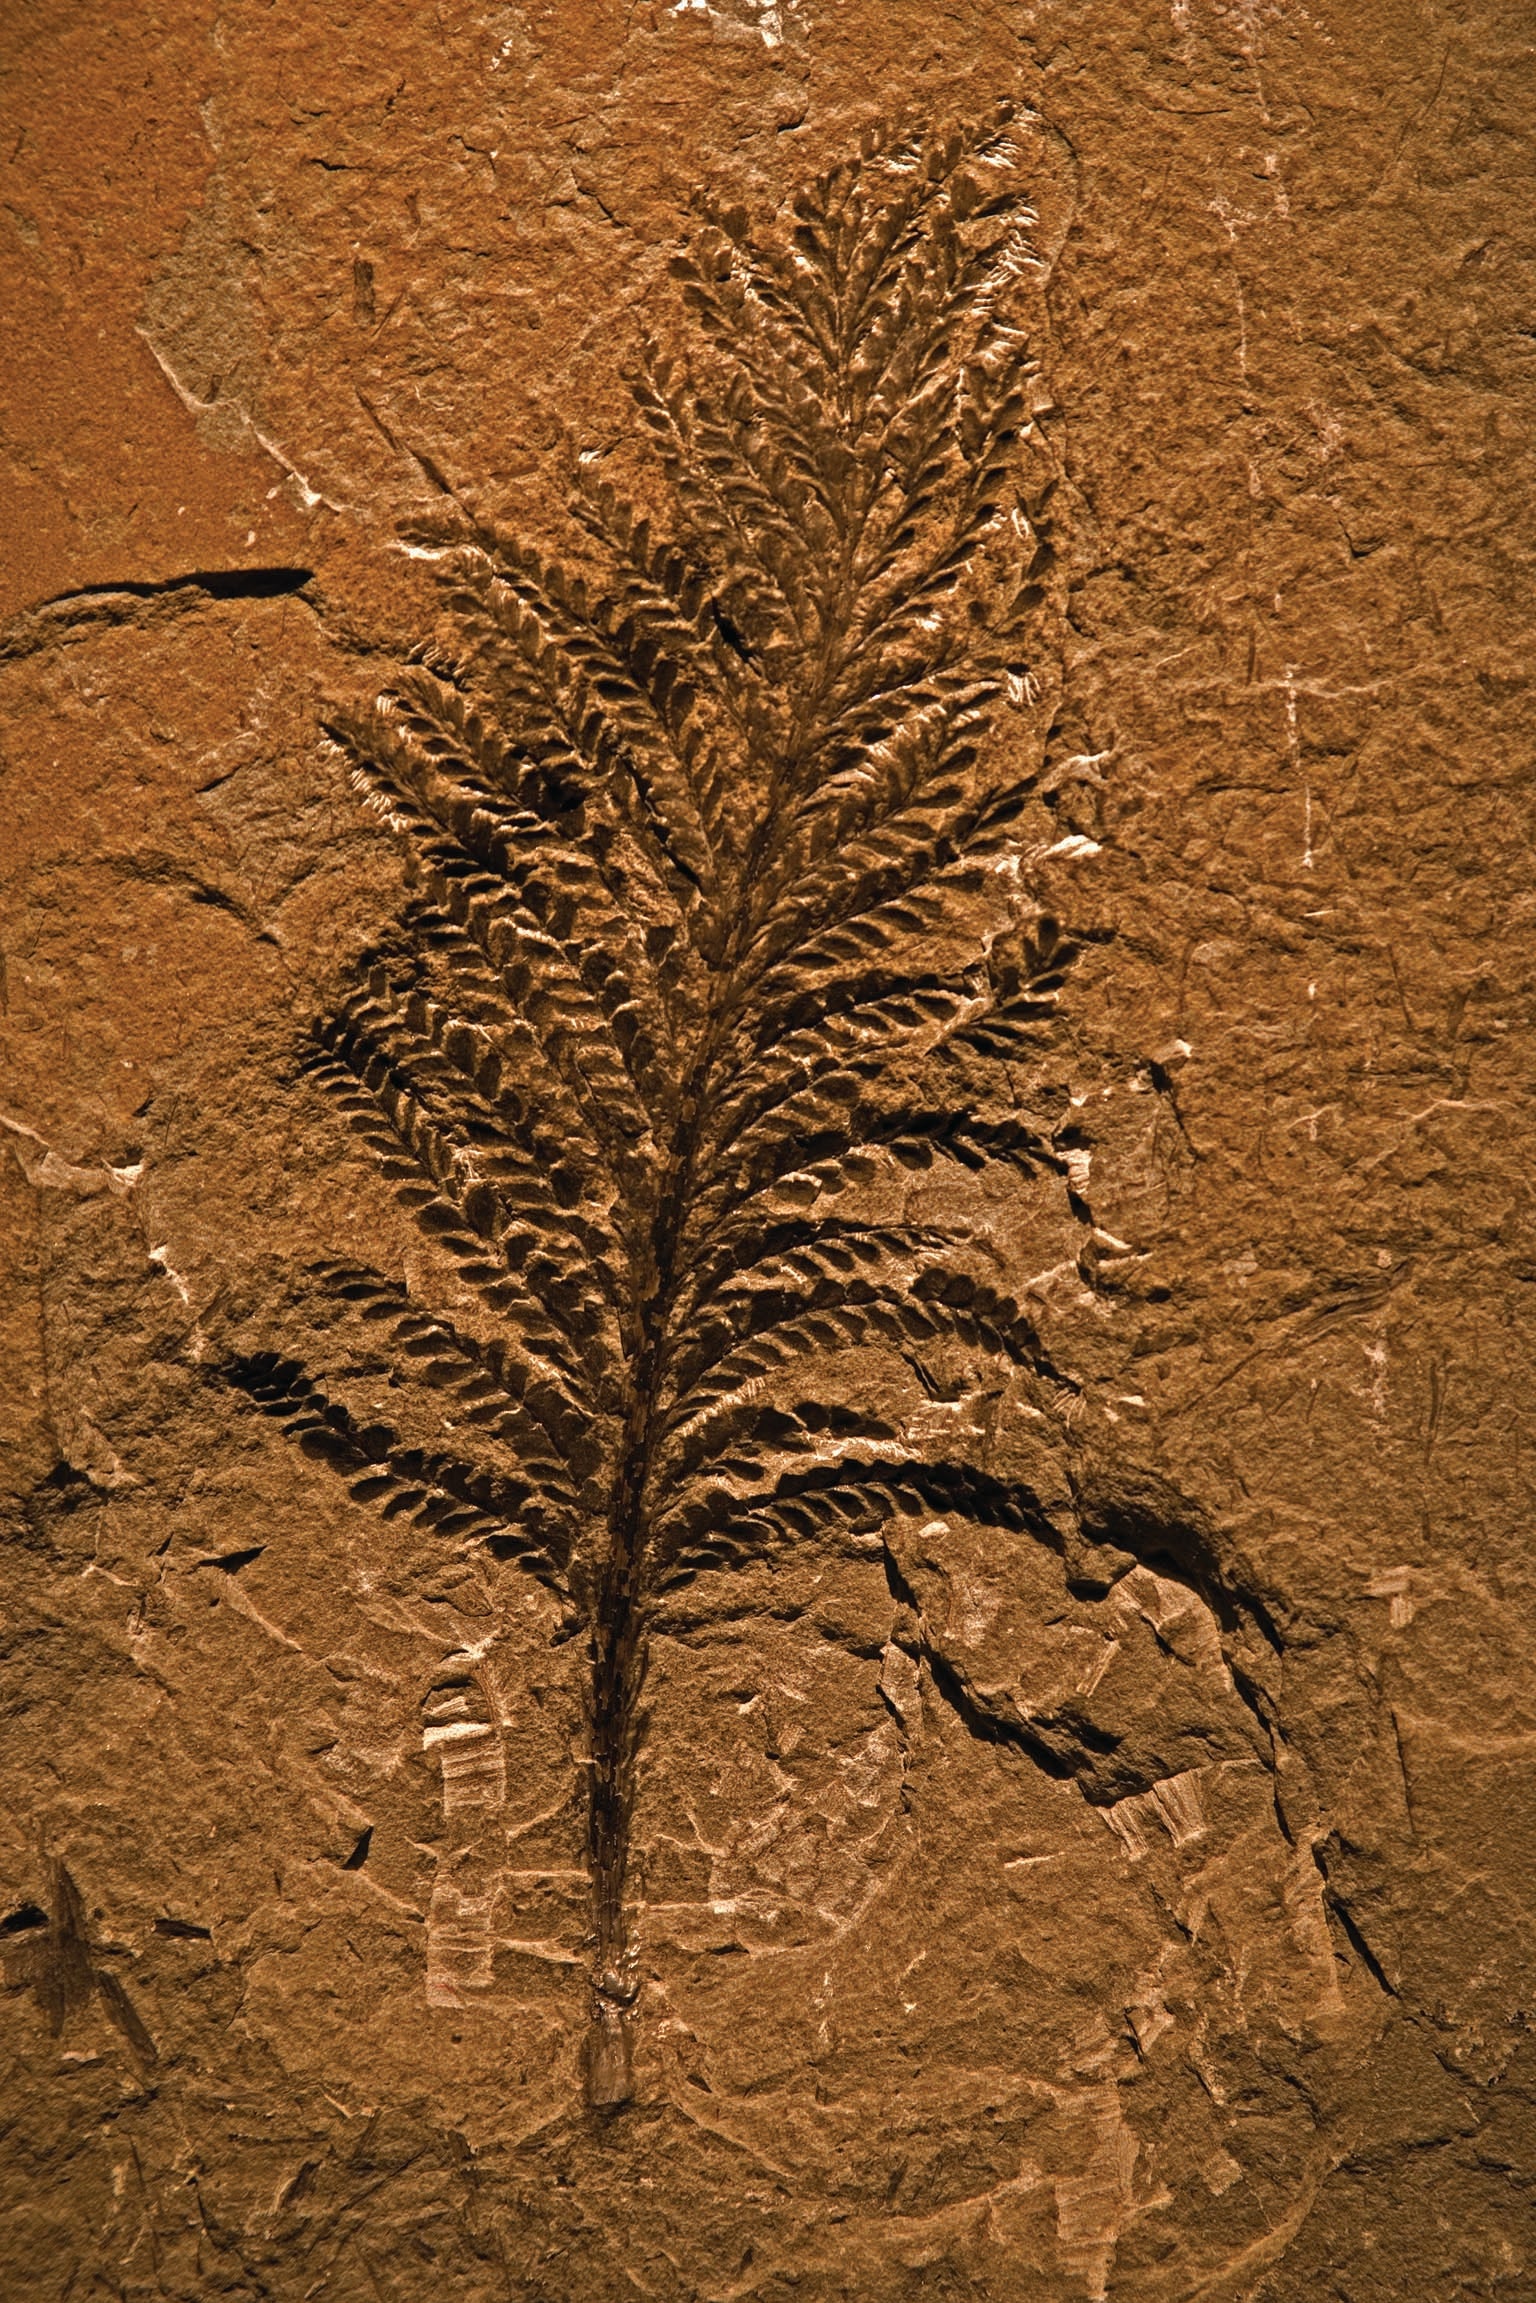 Fossilized Archaeopteris leaf